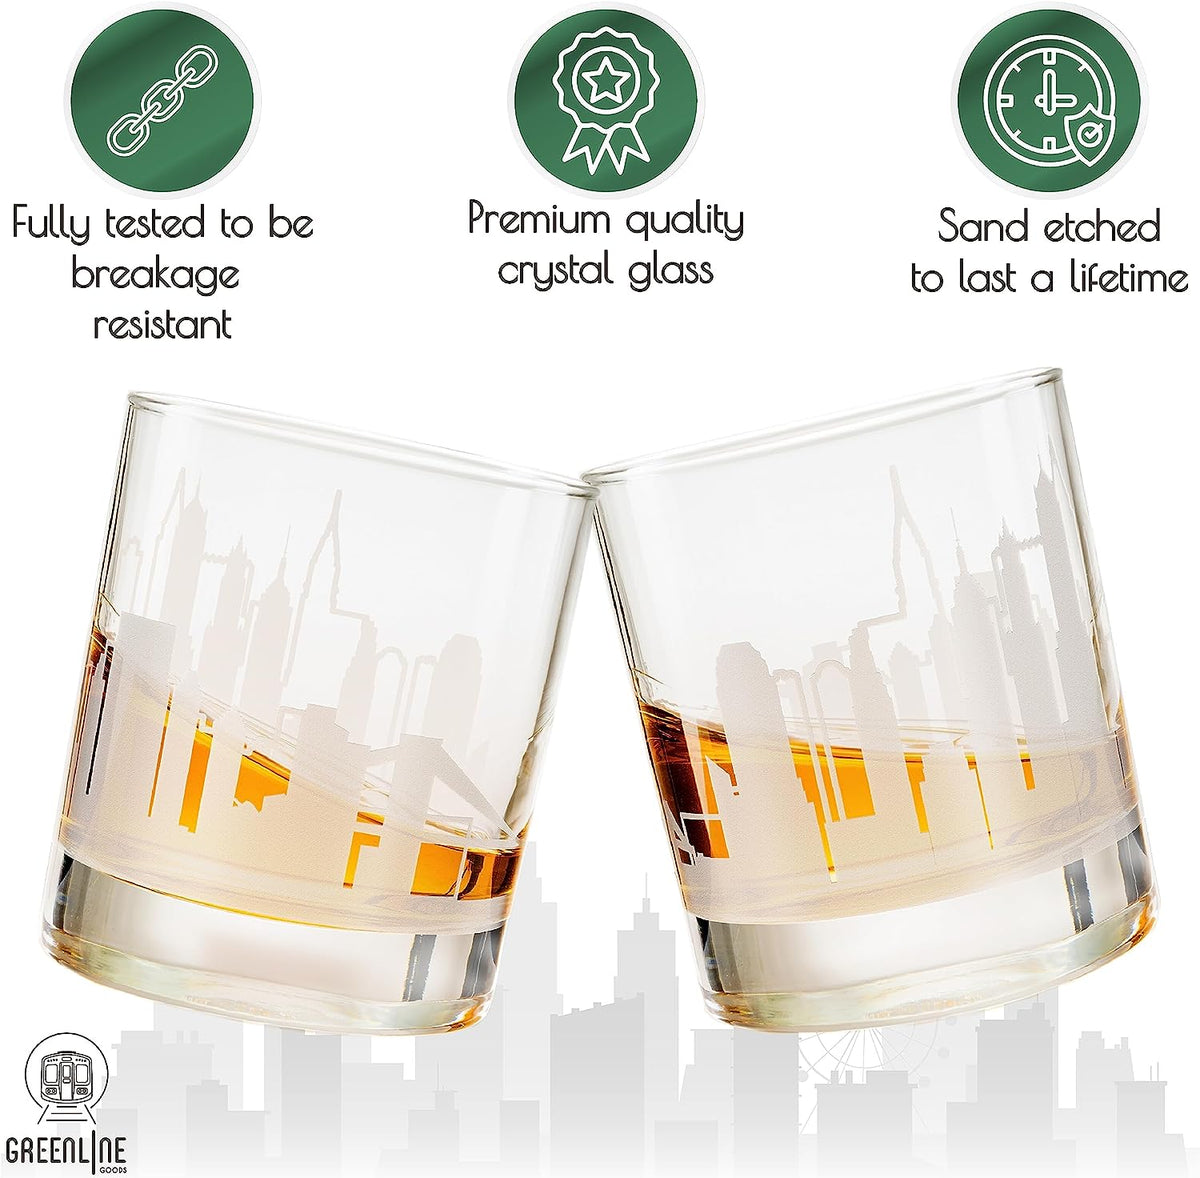 Whiskey Glasses - 10 Oz Tumbler for New York Lovers (Single Glass) - Etched with New York Skyline - Old Fashioned Rocks Glass